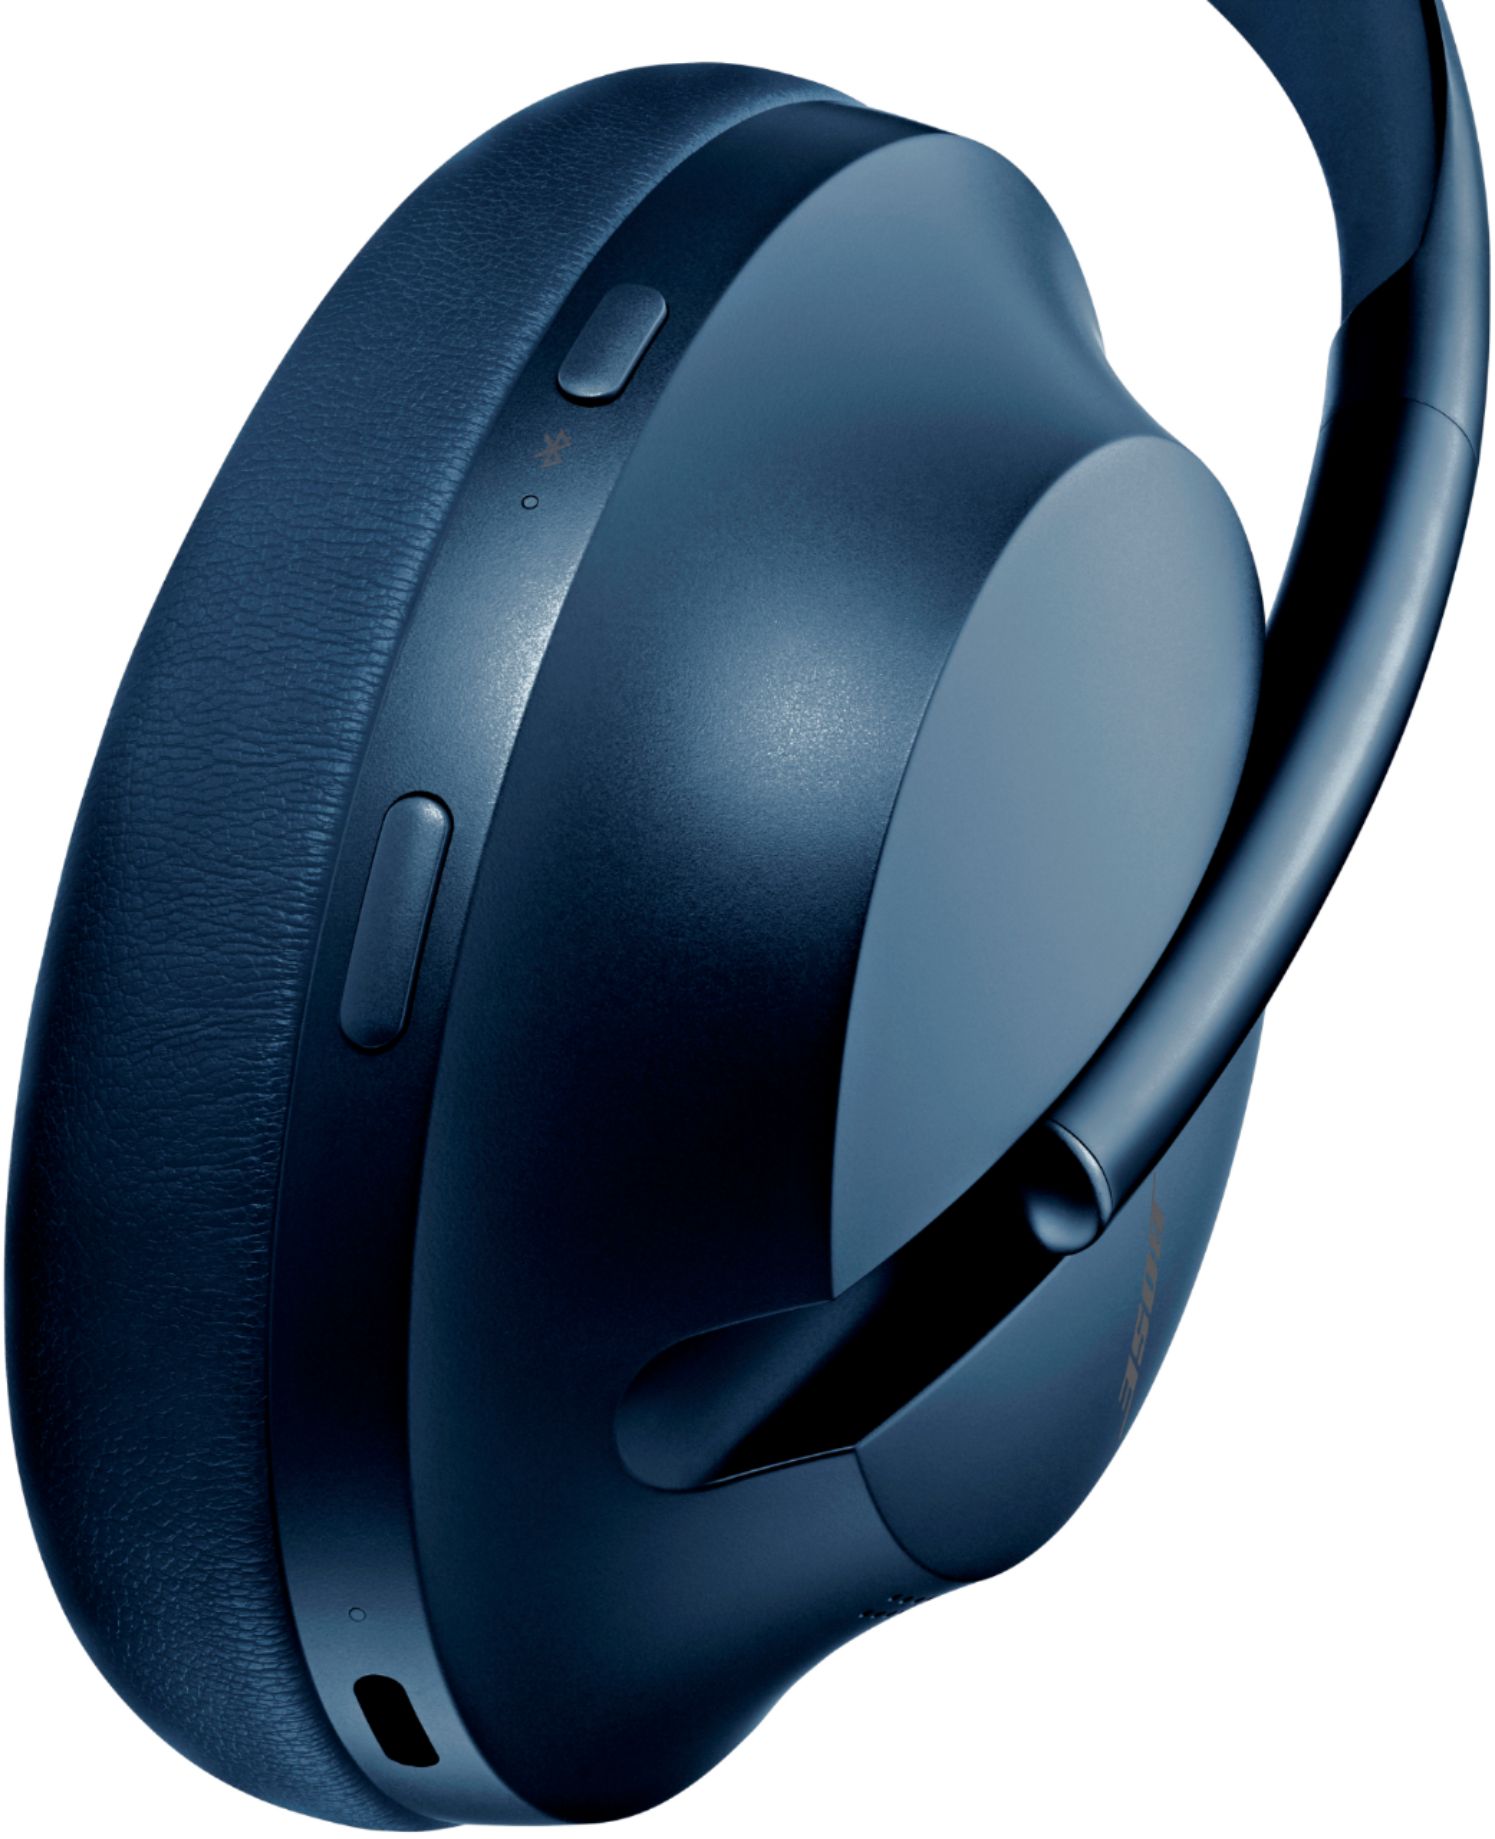 Bose Noise Cancelling Headphones 700 in Canada